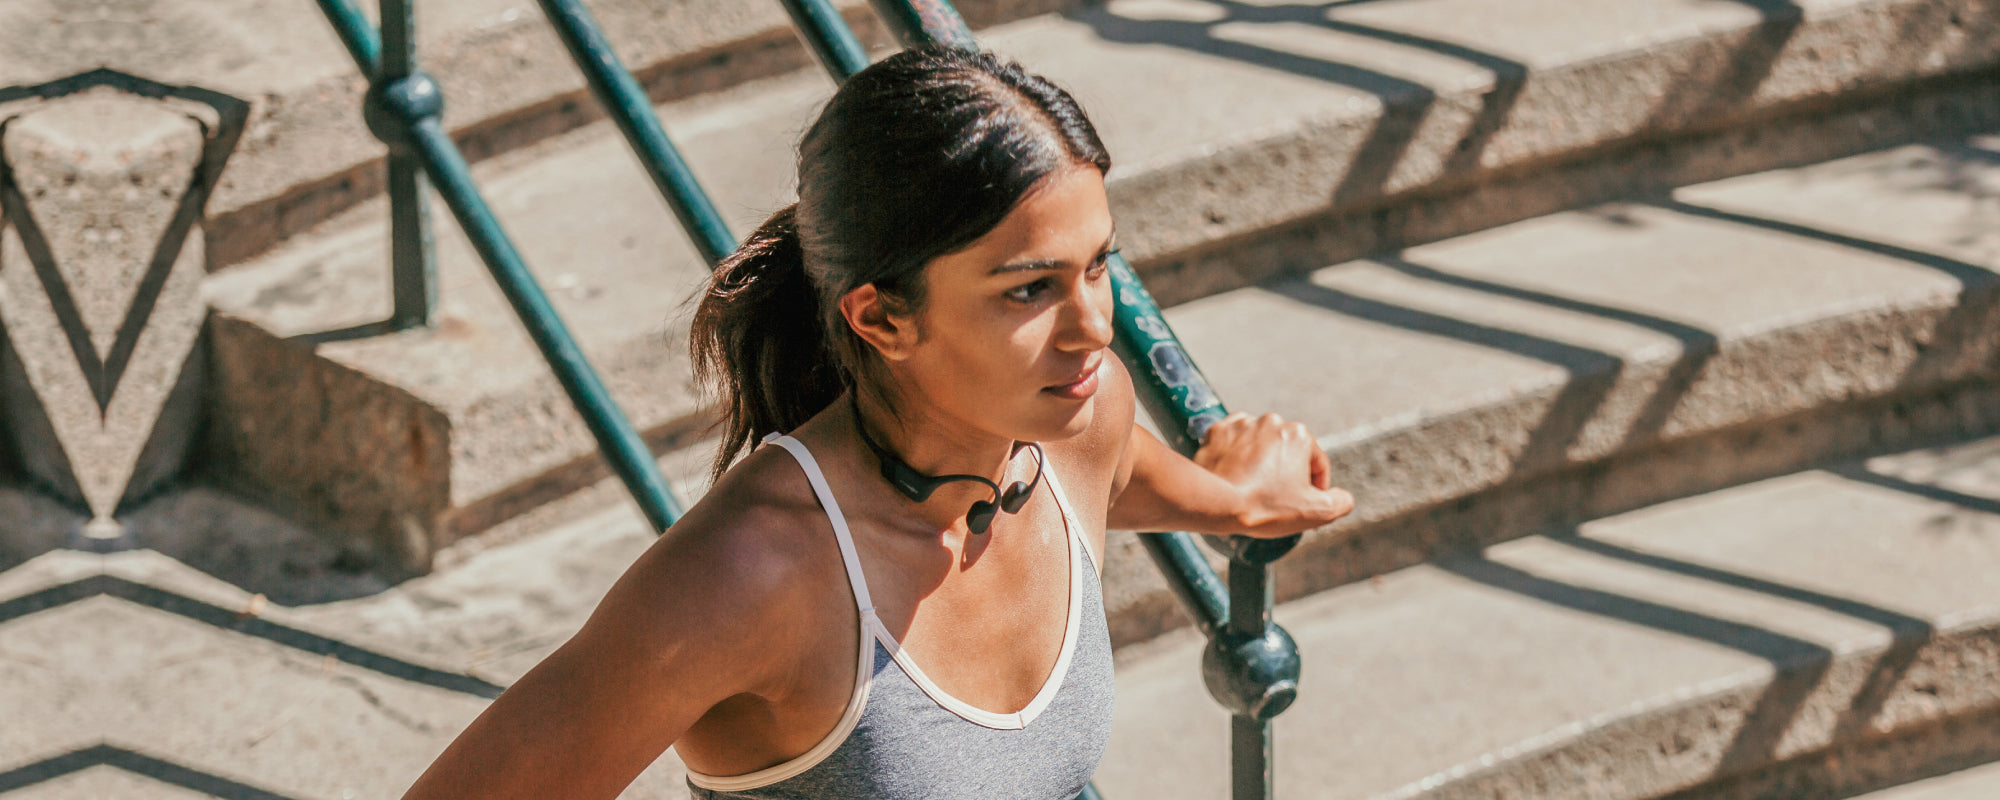 Woman doing outdoor workout while wearing AfterShokz Aeropex wireless headphones